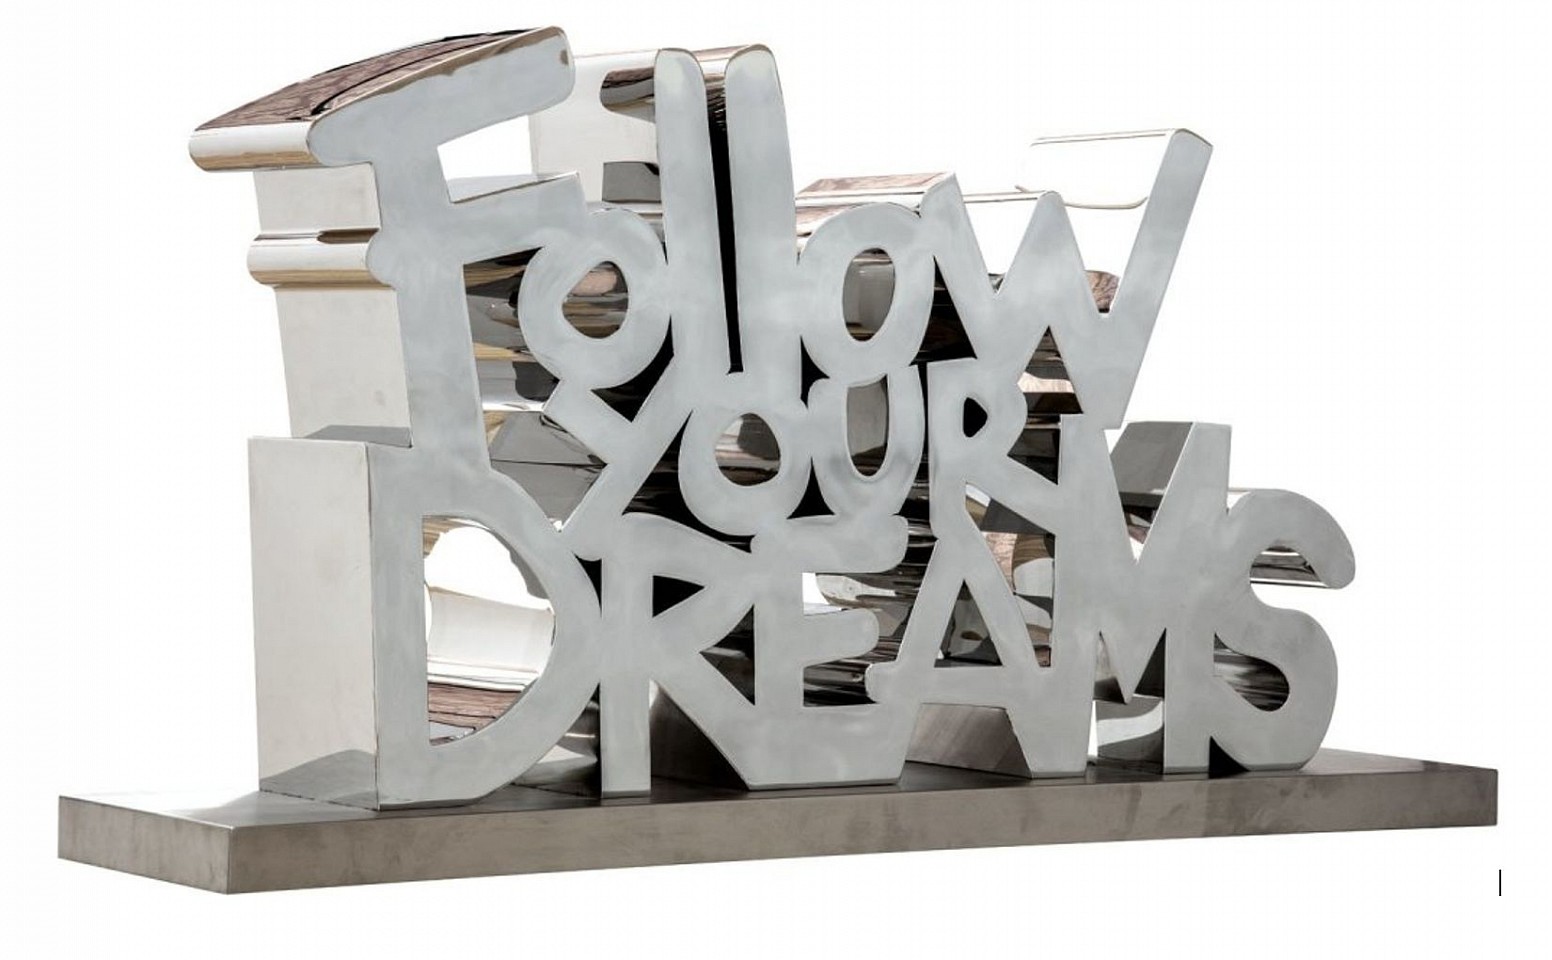 Mr. Brainwash, Follow Your Dreams - Chrome Silver, 2023
Polished 316 Marine Grade Stainless Steel Sculpture, 26 x 48 1/2 x 11 3/4 in.